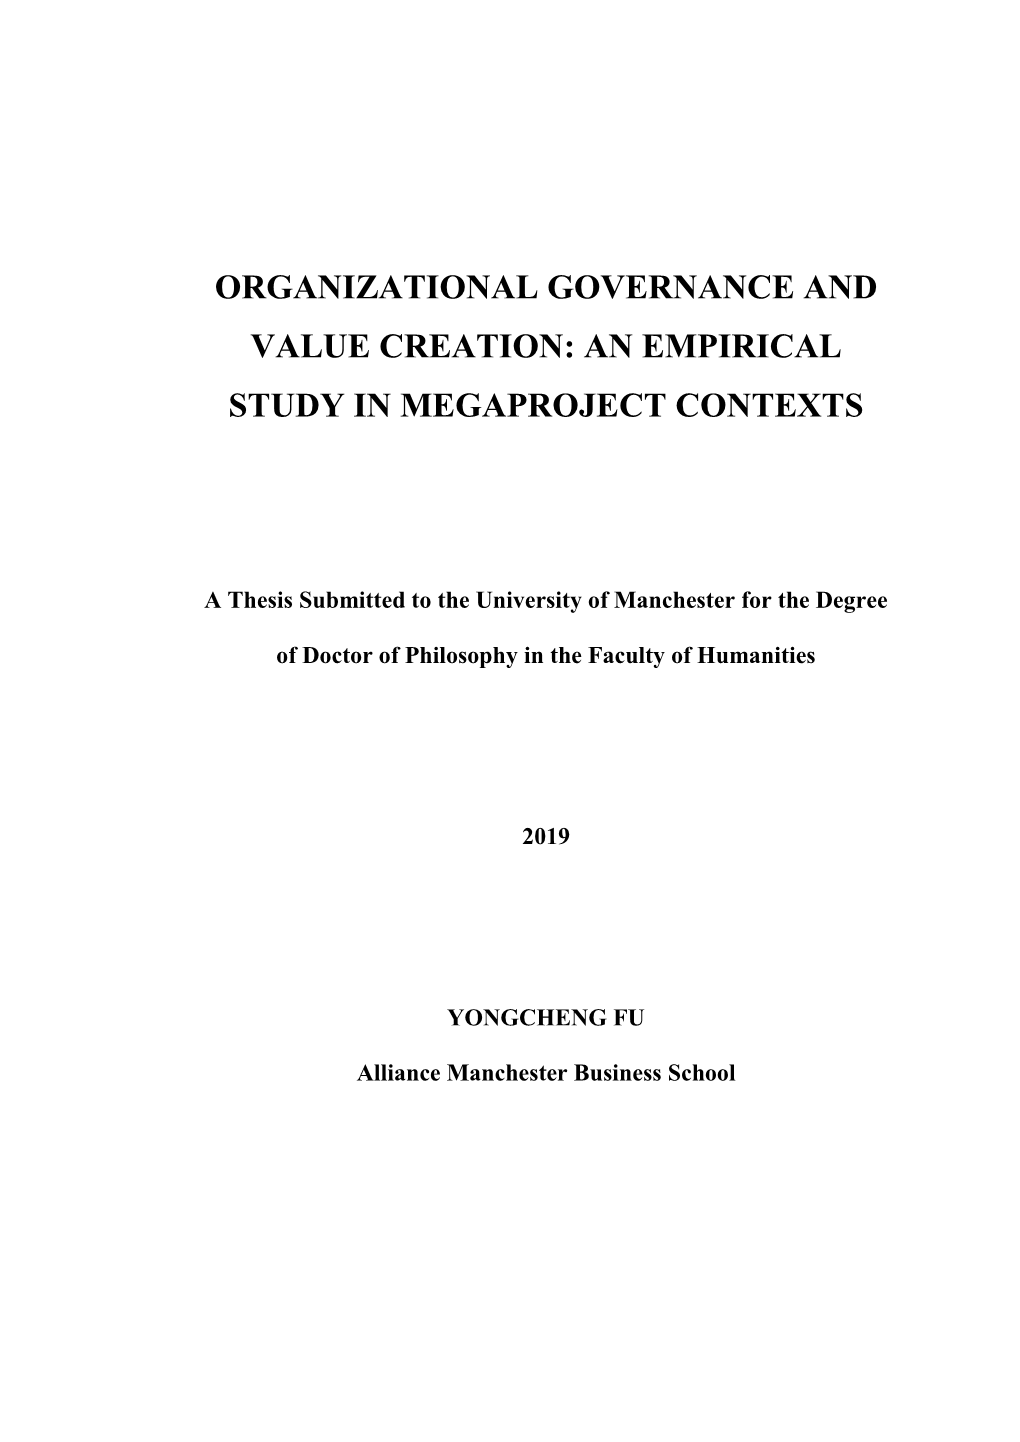 Organizational Governance and Value Creation: an Empirical Study in Megaproject Contexts